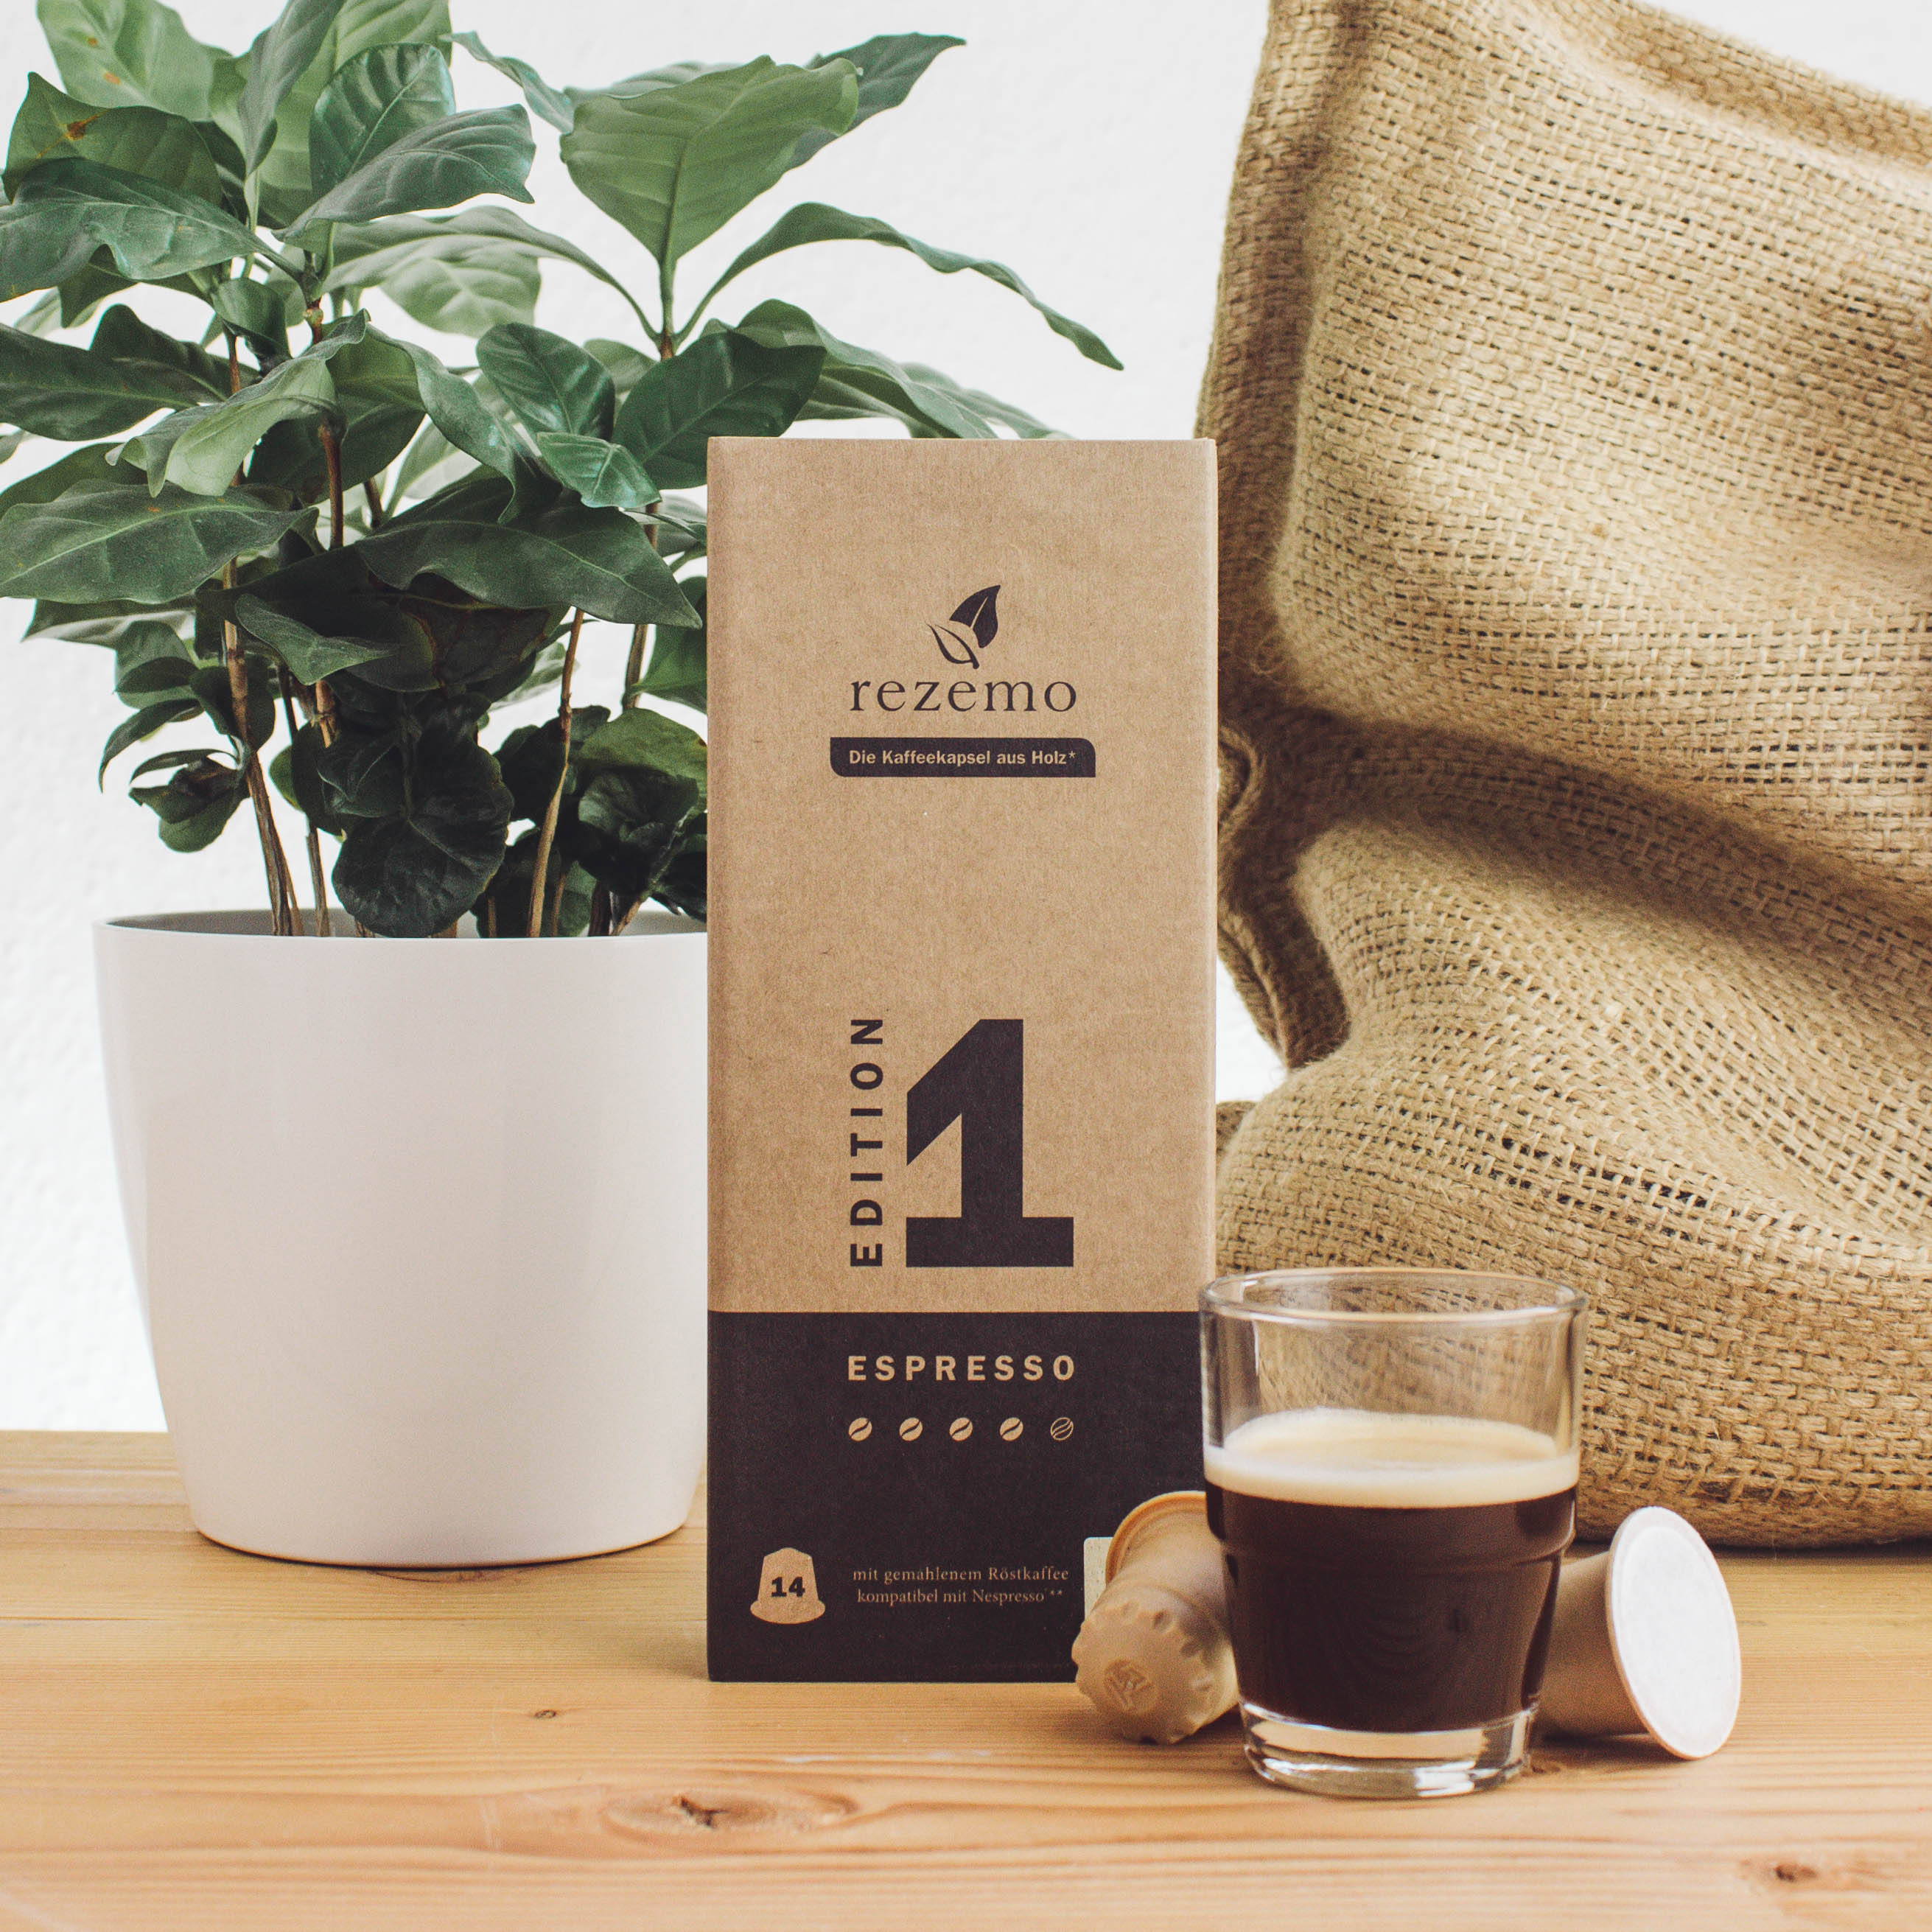 Coffee plant, rezemo bag, and a glass of coffee in front of a jute sack.